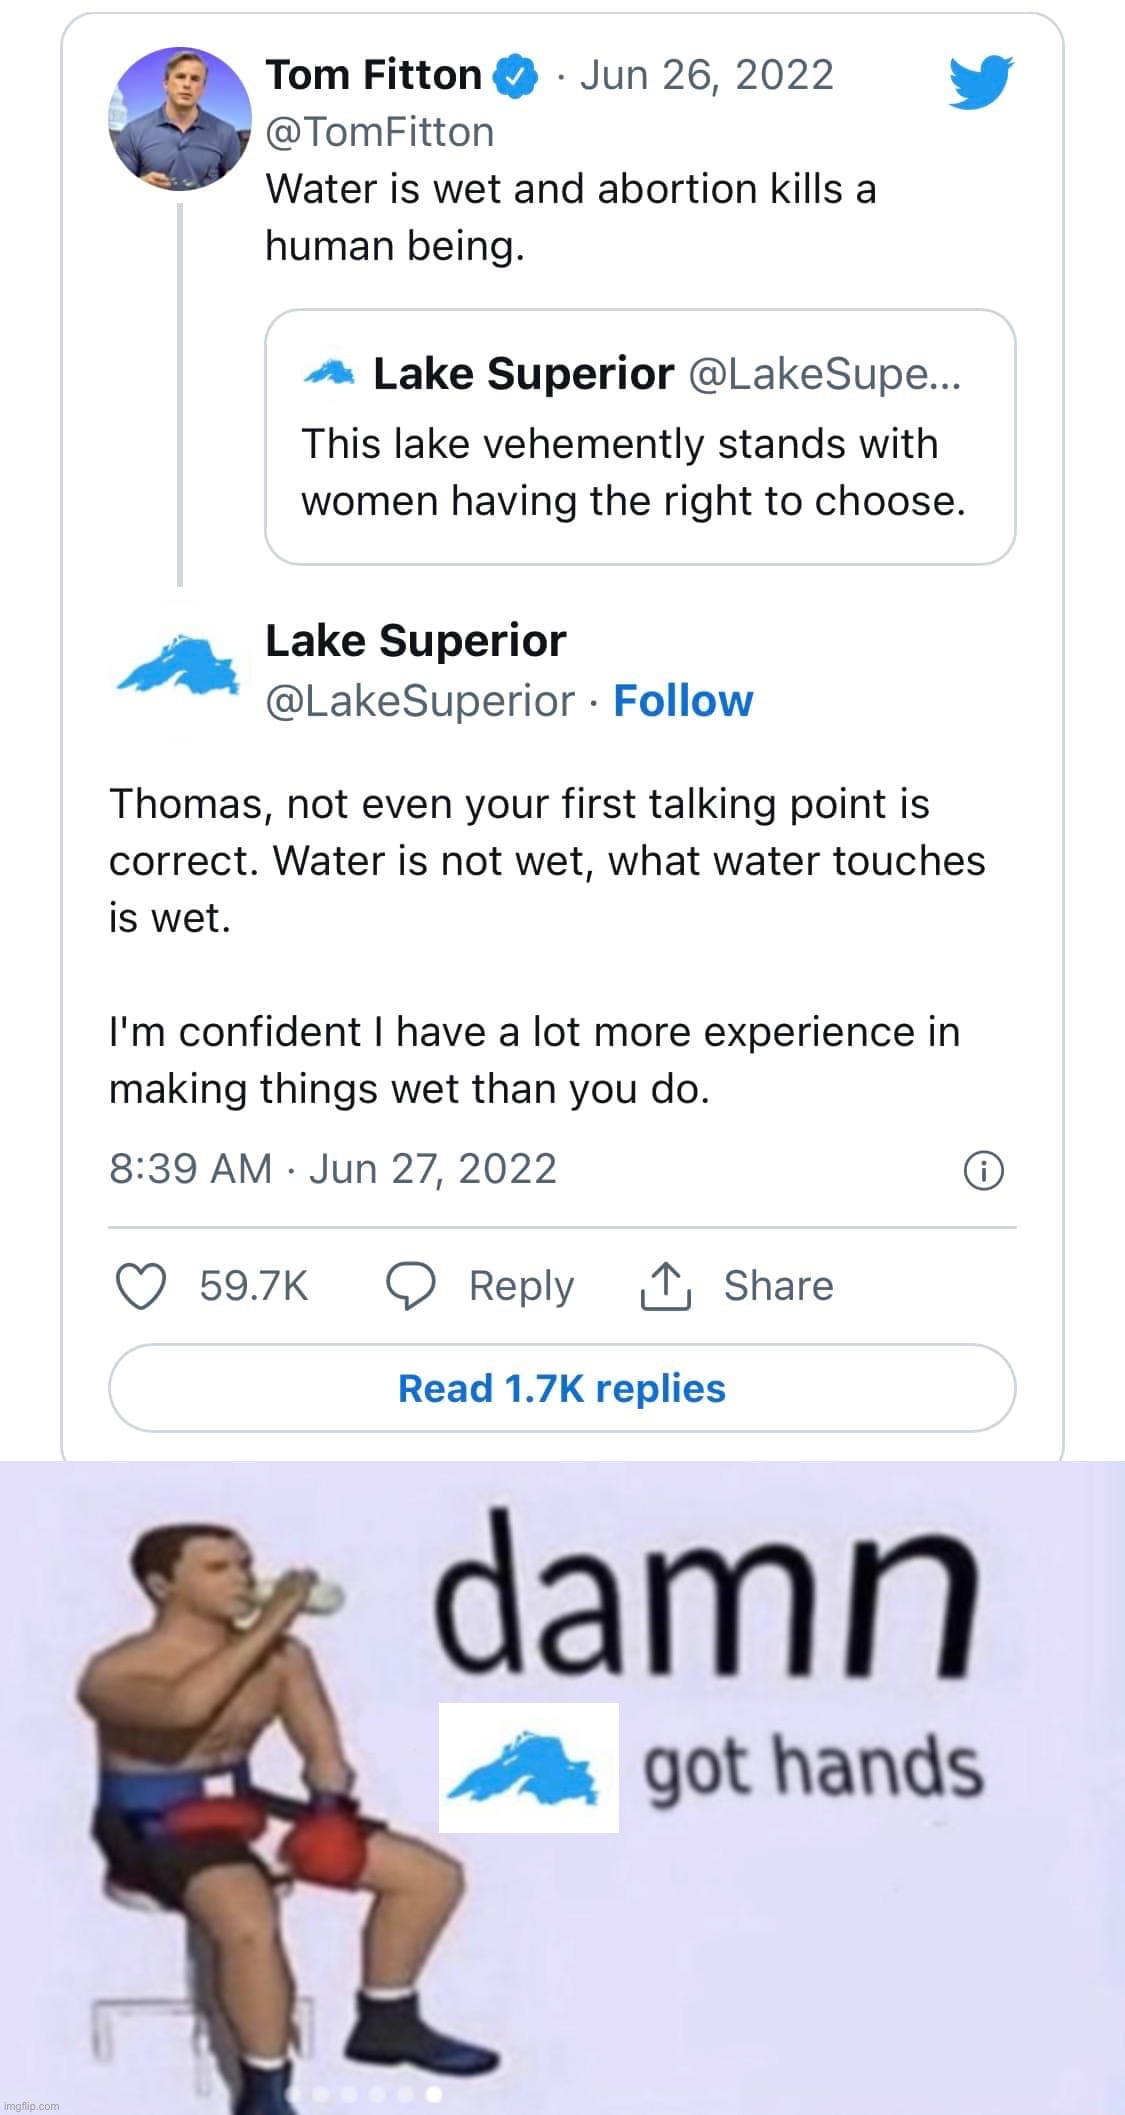 Lake Superior 1, Tom Fitton 0 | image tagged in lake superior vs tom fitton,damn got hands,water,wet,abortion,roasted | made w/ Imgflip meme maker